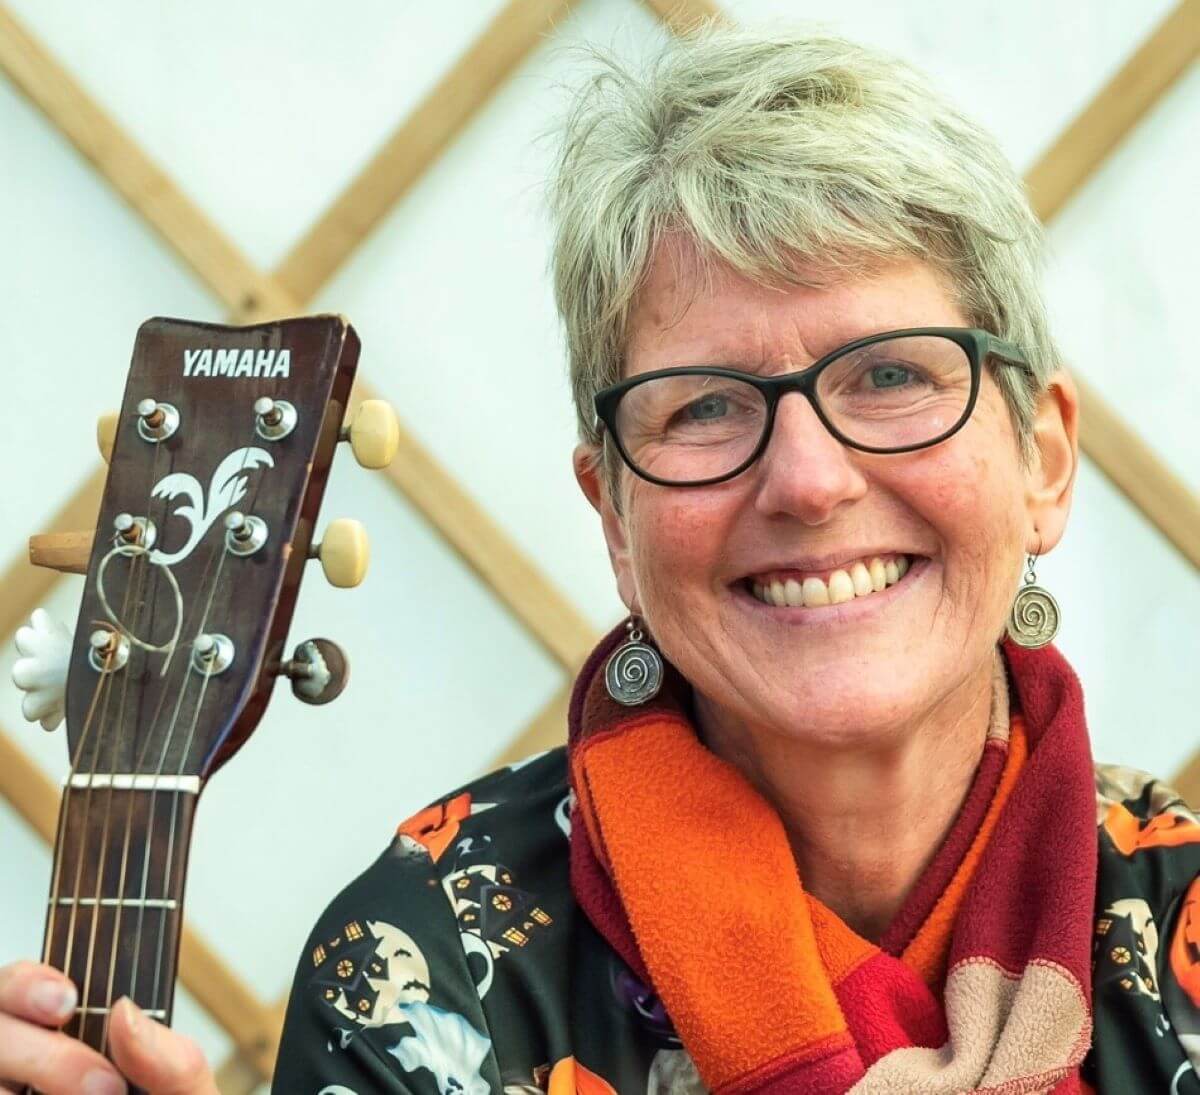 A person smiles and holds up a guitar